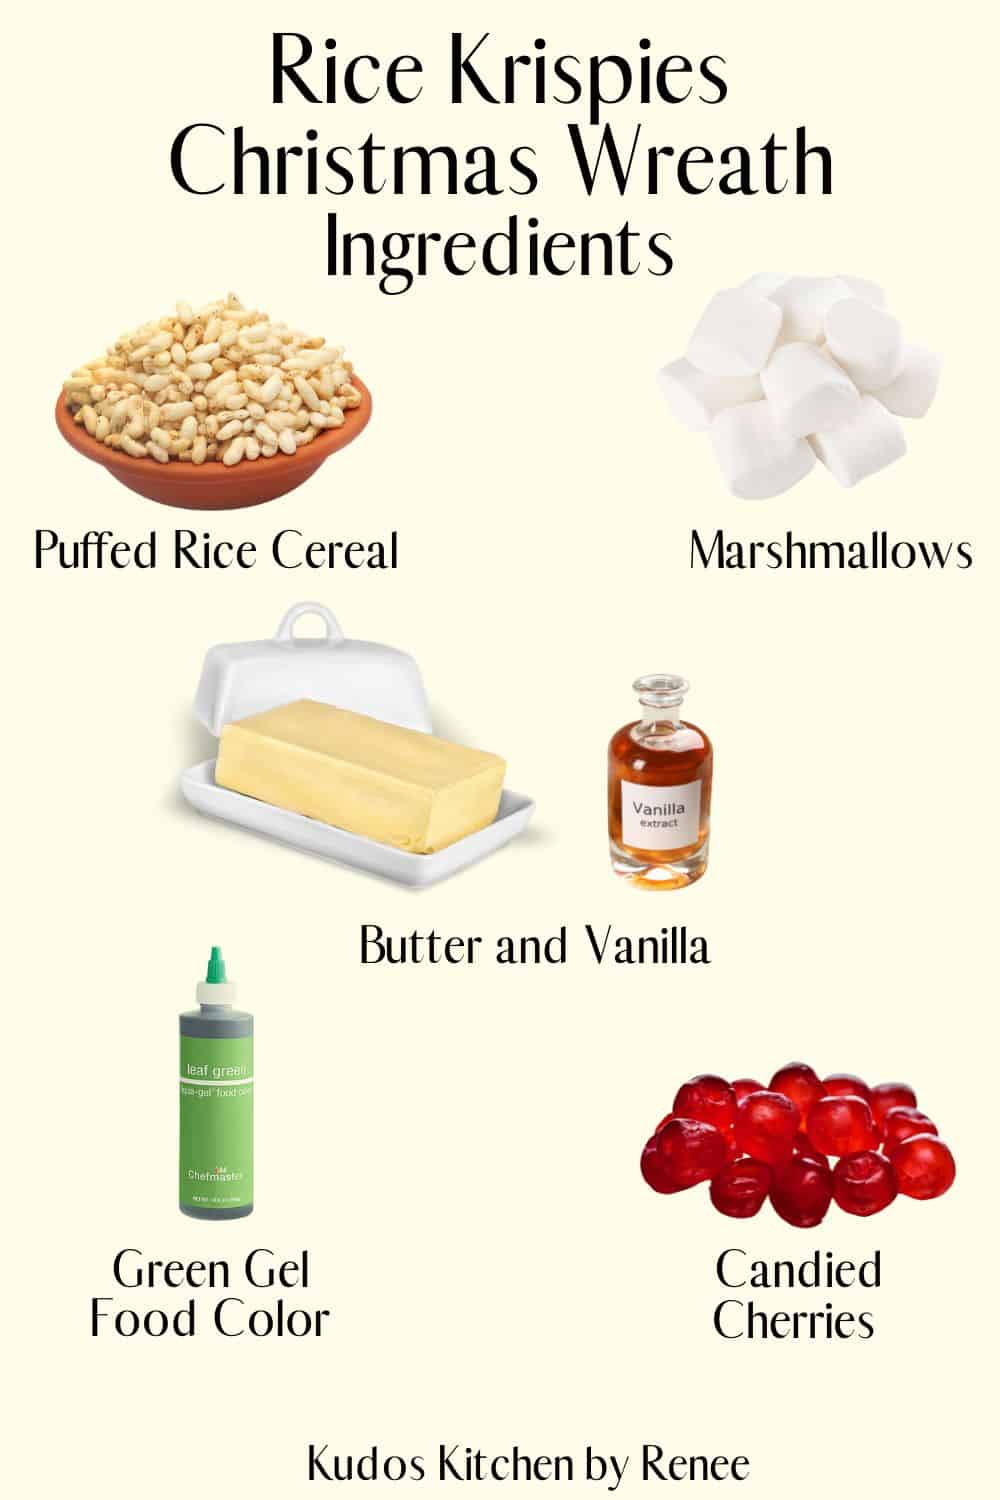 Visual ingredient list for how to make Rice Krispies Christmas Wreath.